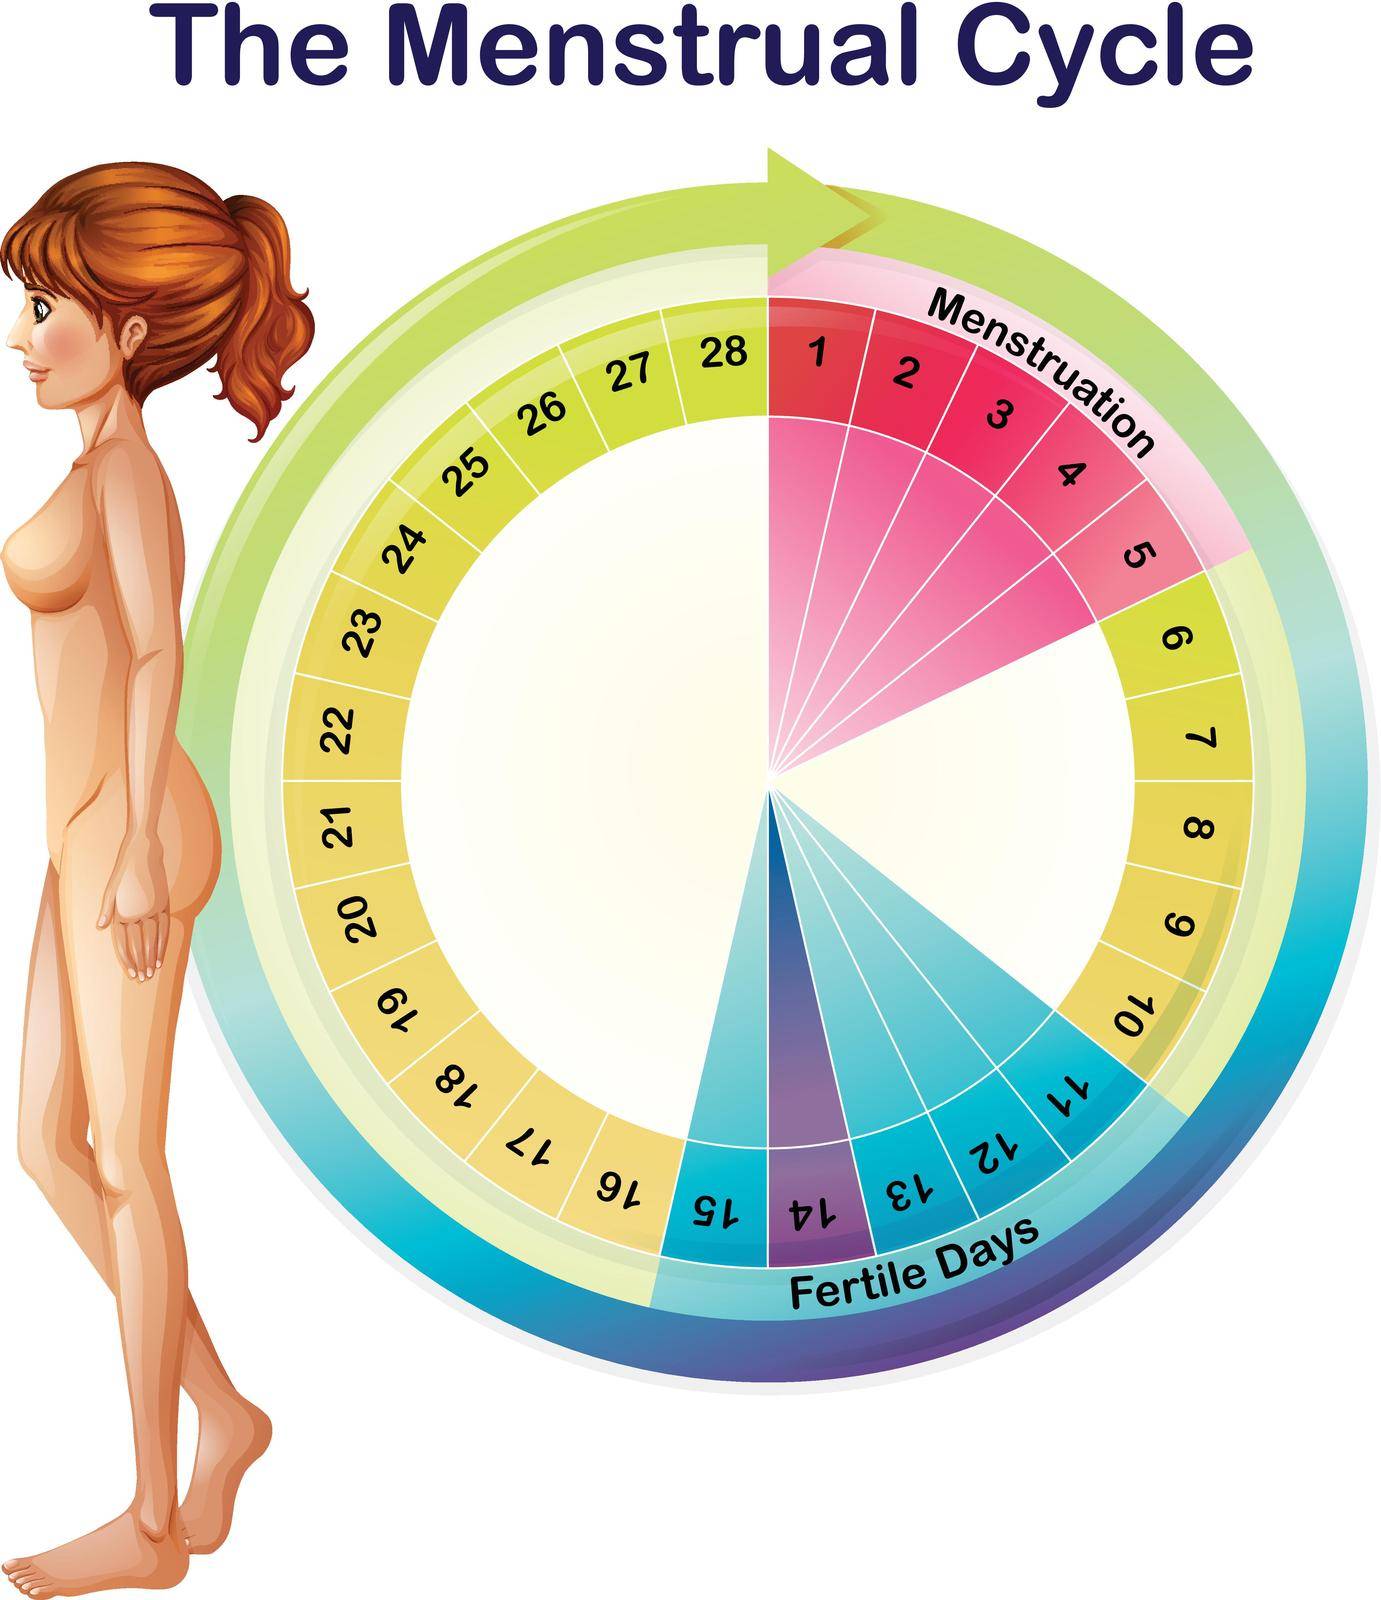 A Vector of the Menstrual Cycle illustration